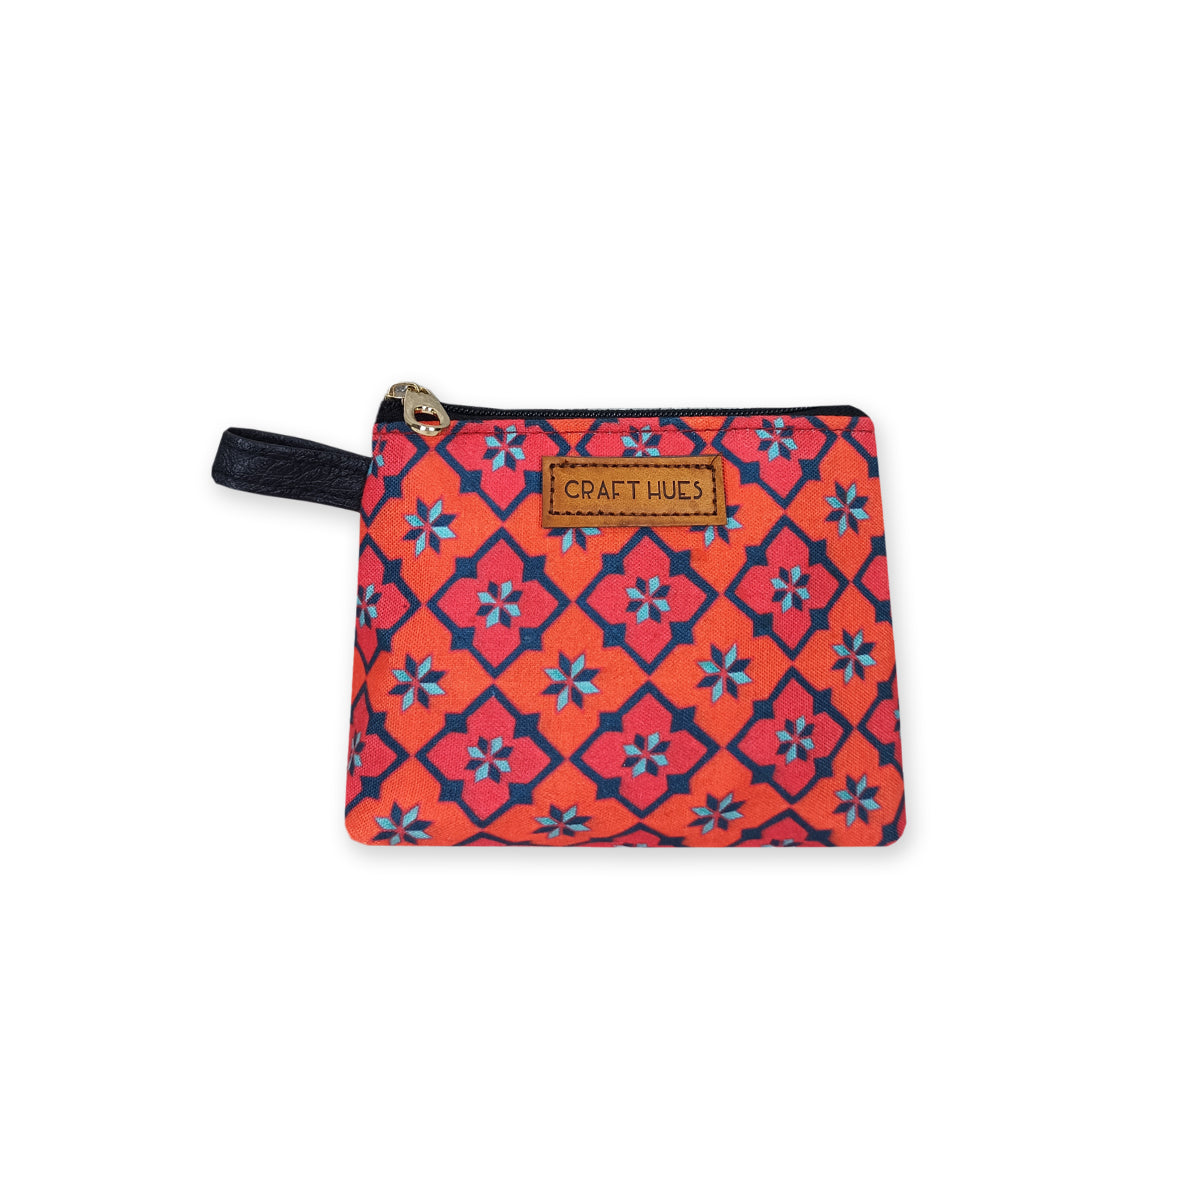 Peach kites Tile Sling Pouch Combo